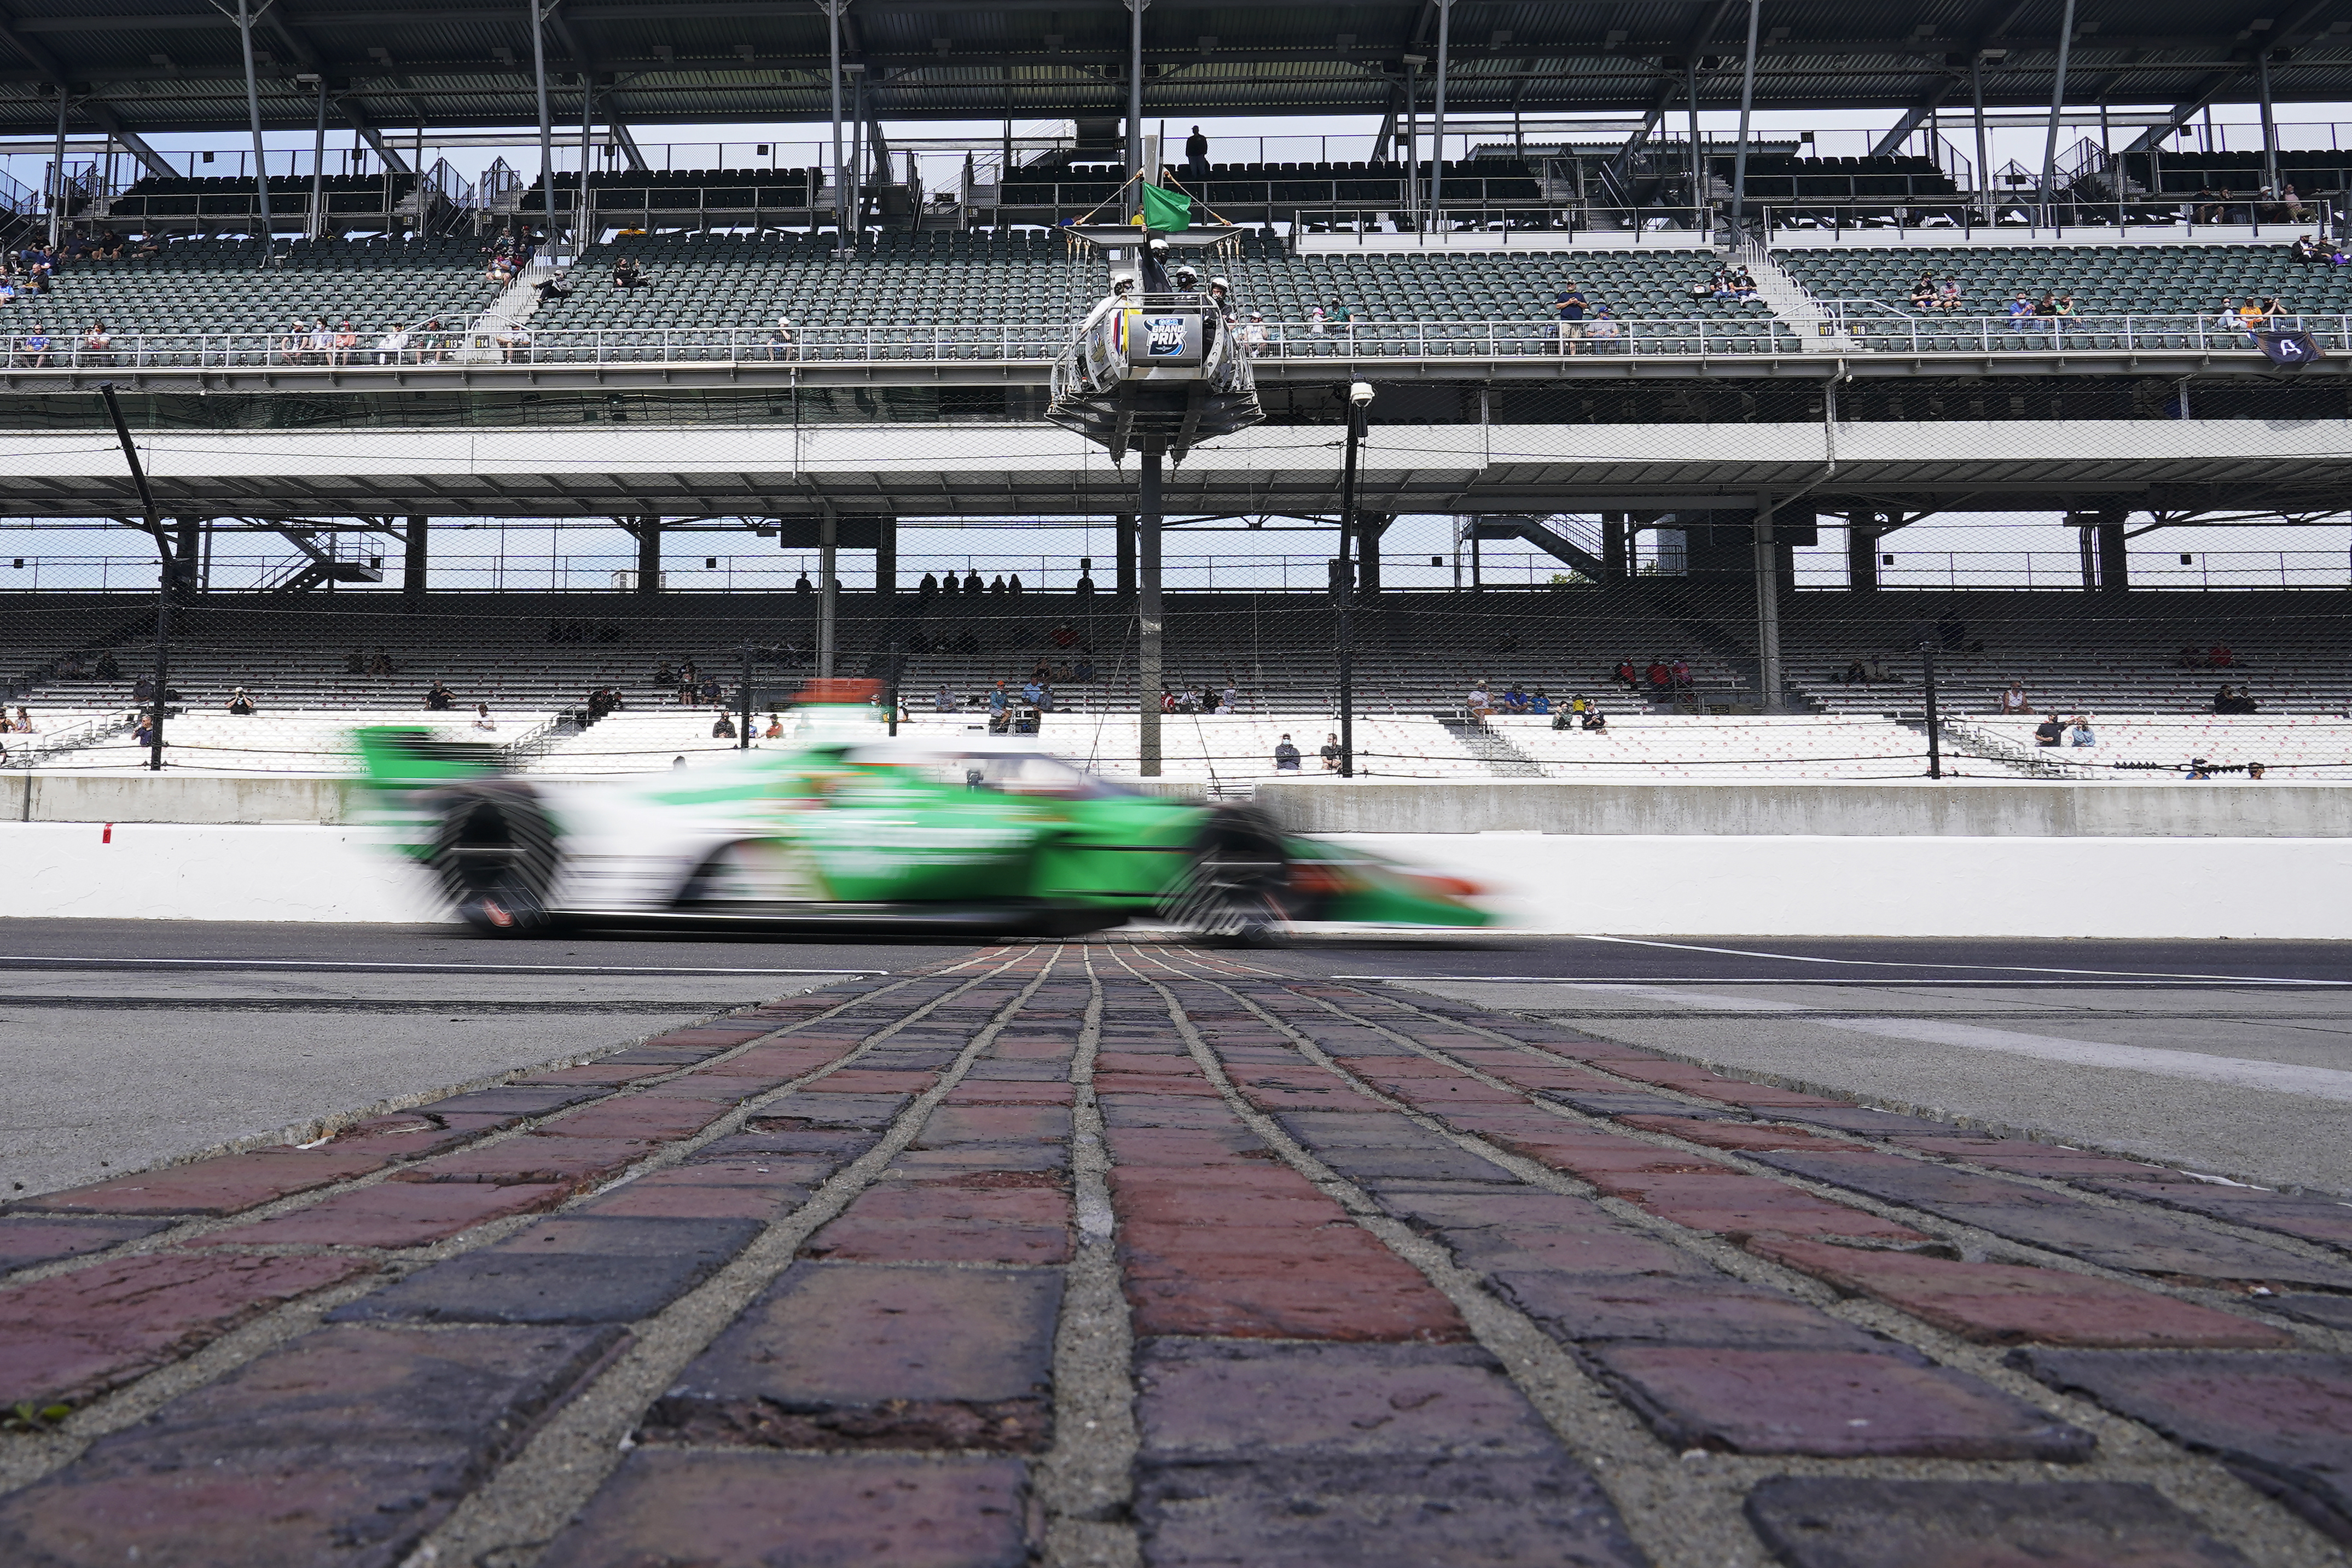 Indy 500 to host 135,000 in largest sports event in pandemic – The